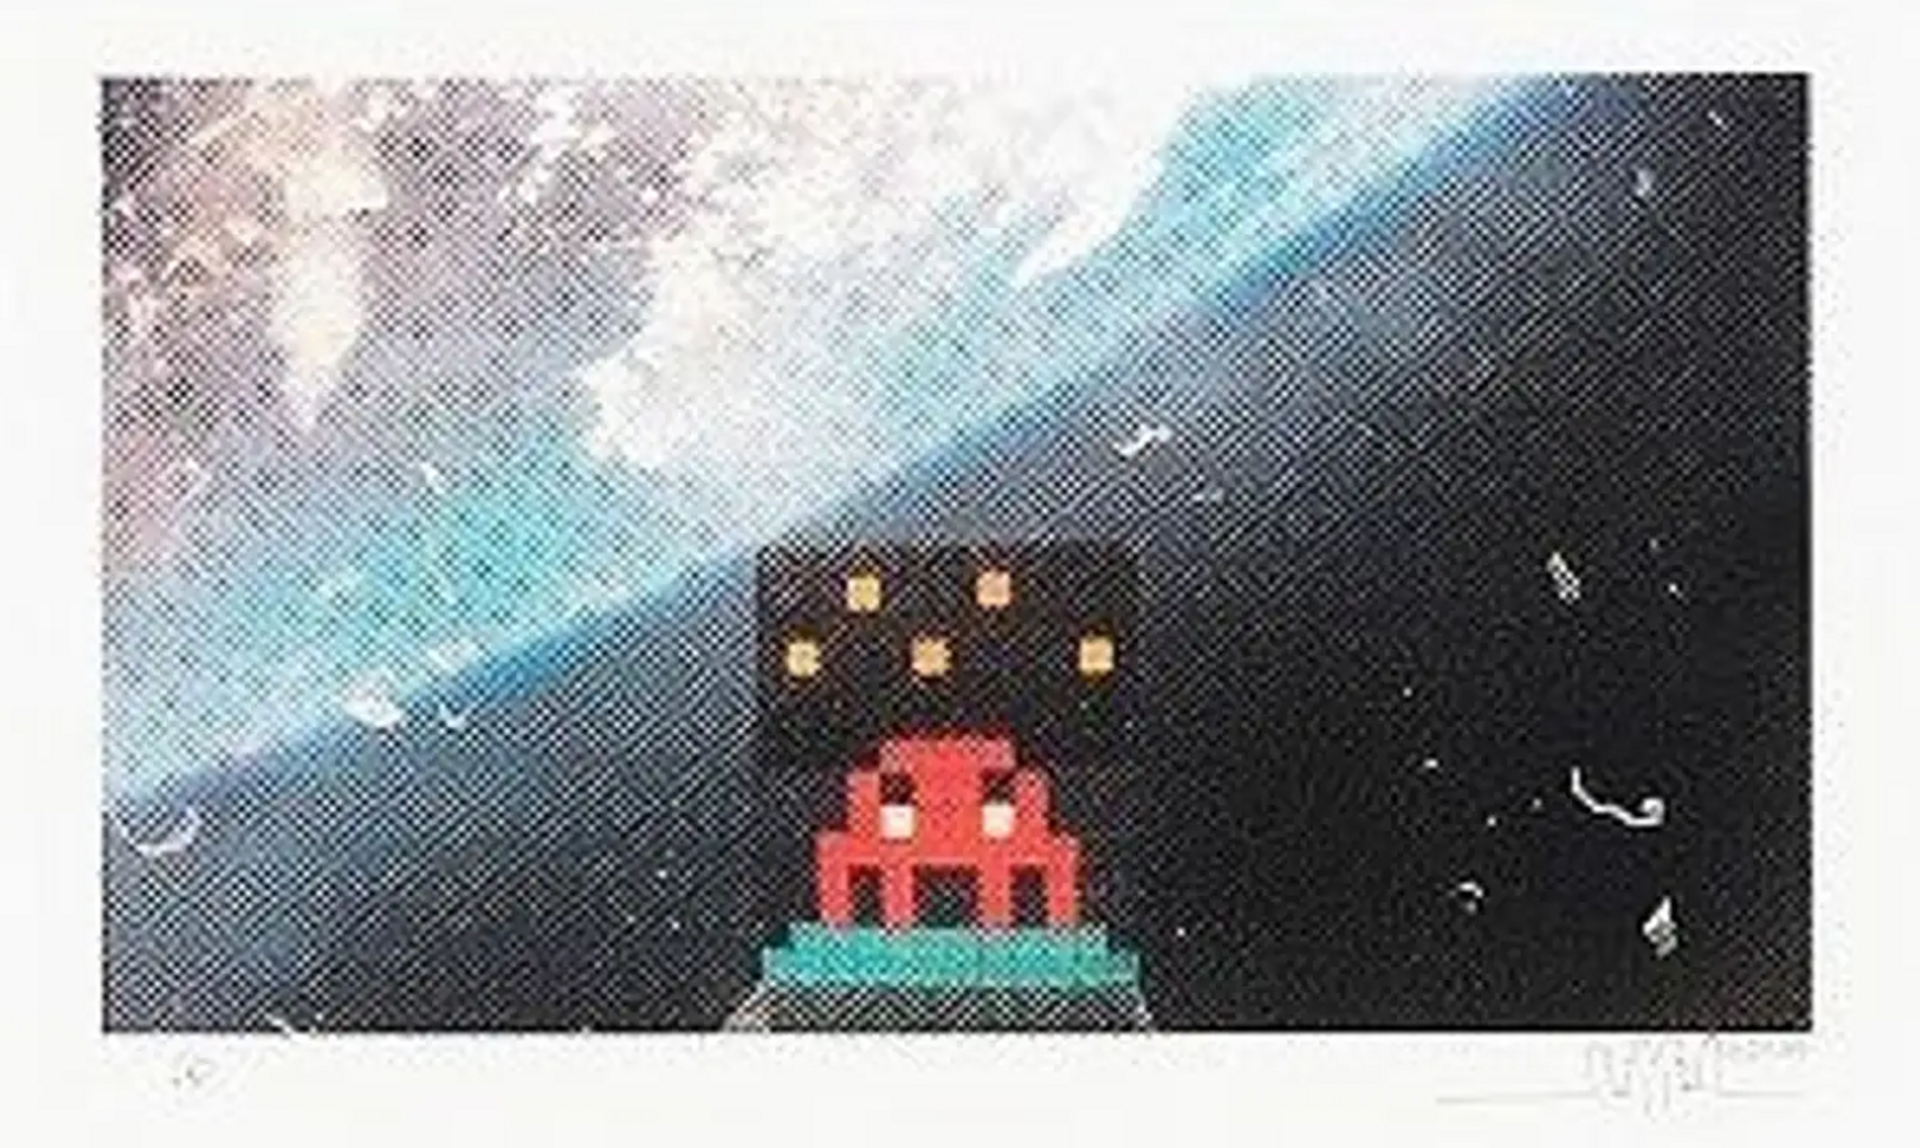 Art4Space print by Invader